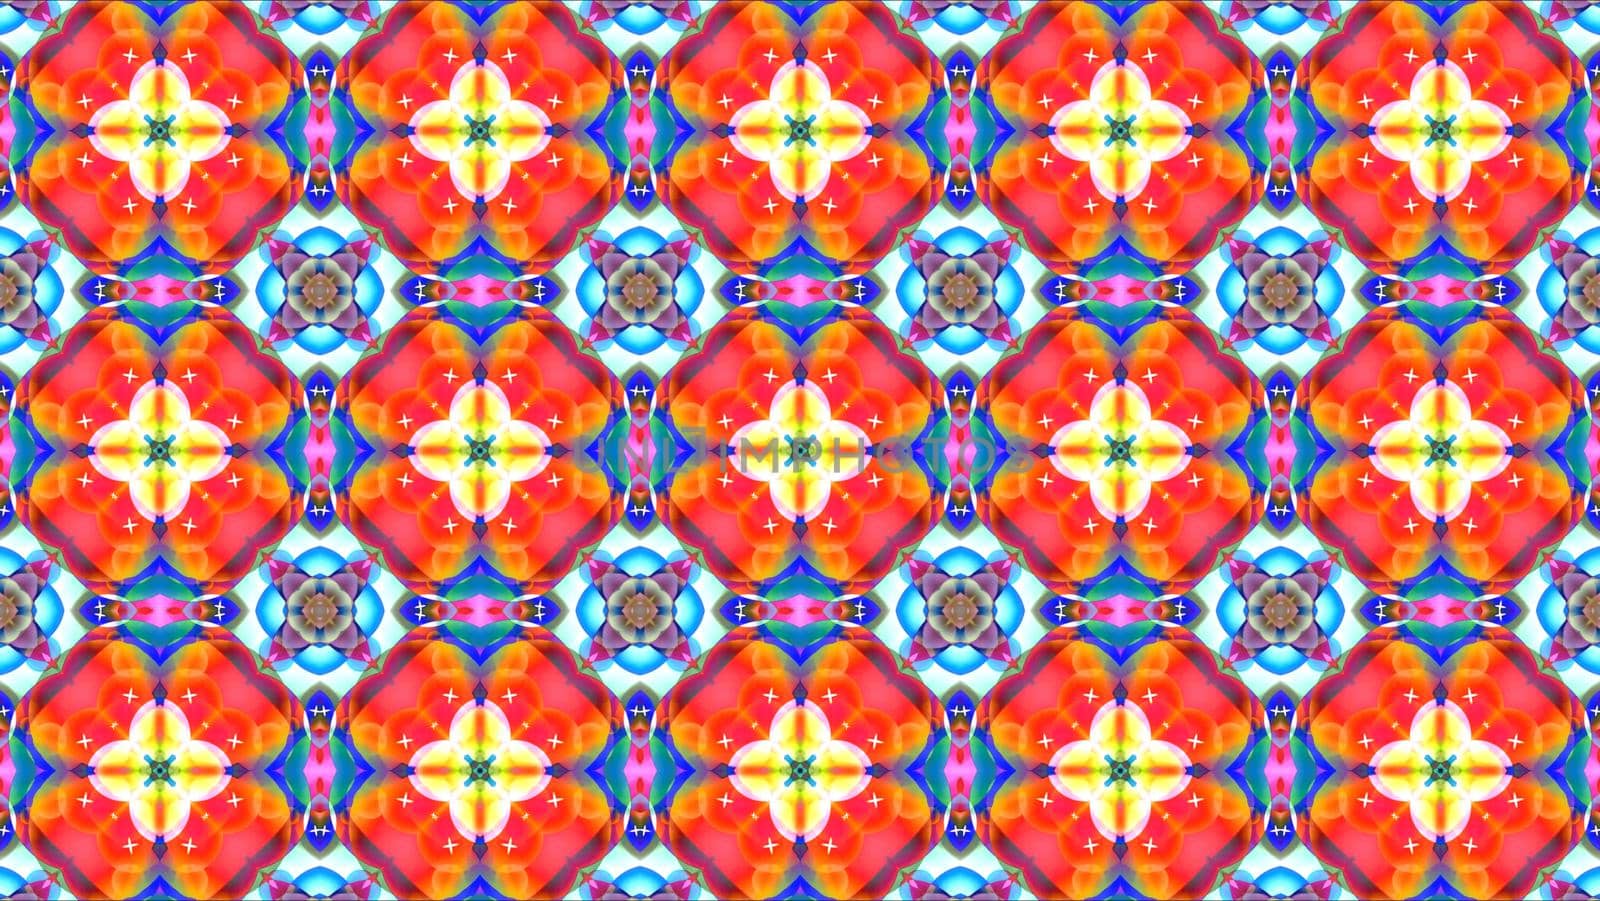 red yellow giant flower violet cross pollen with white eight stars and little blue flower kaleidoscope reflection texture pattern background